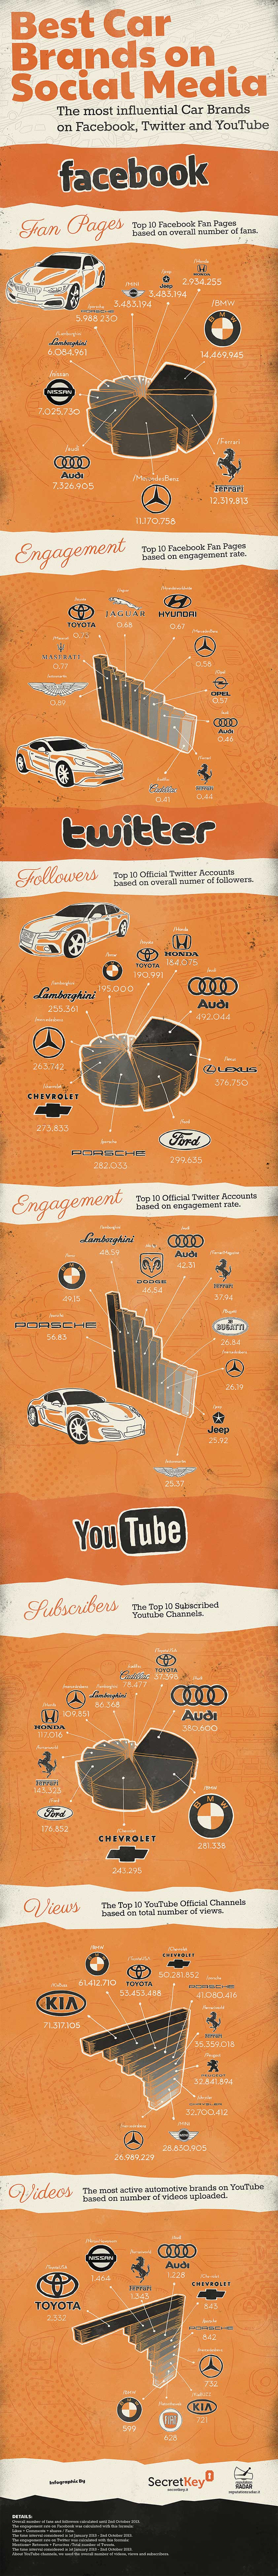 Infographic - Automotive Brands on Social Media